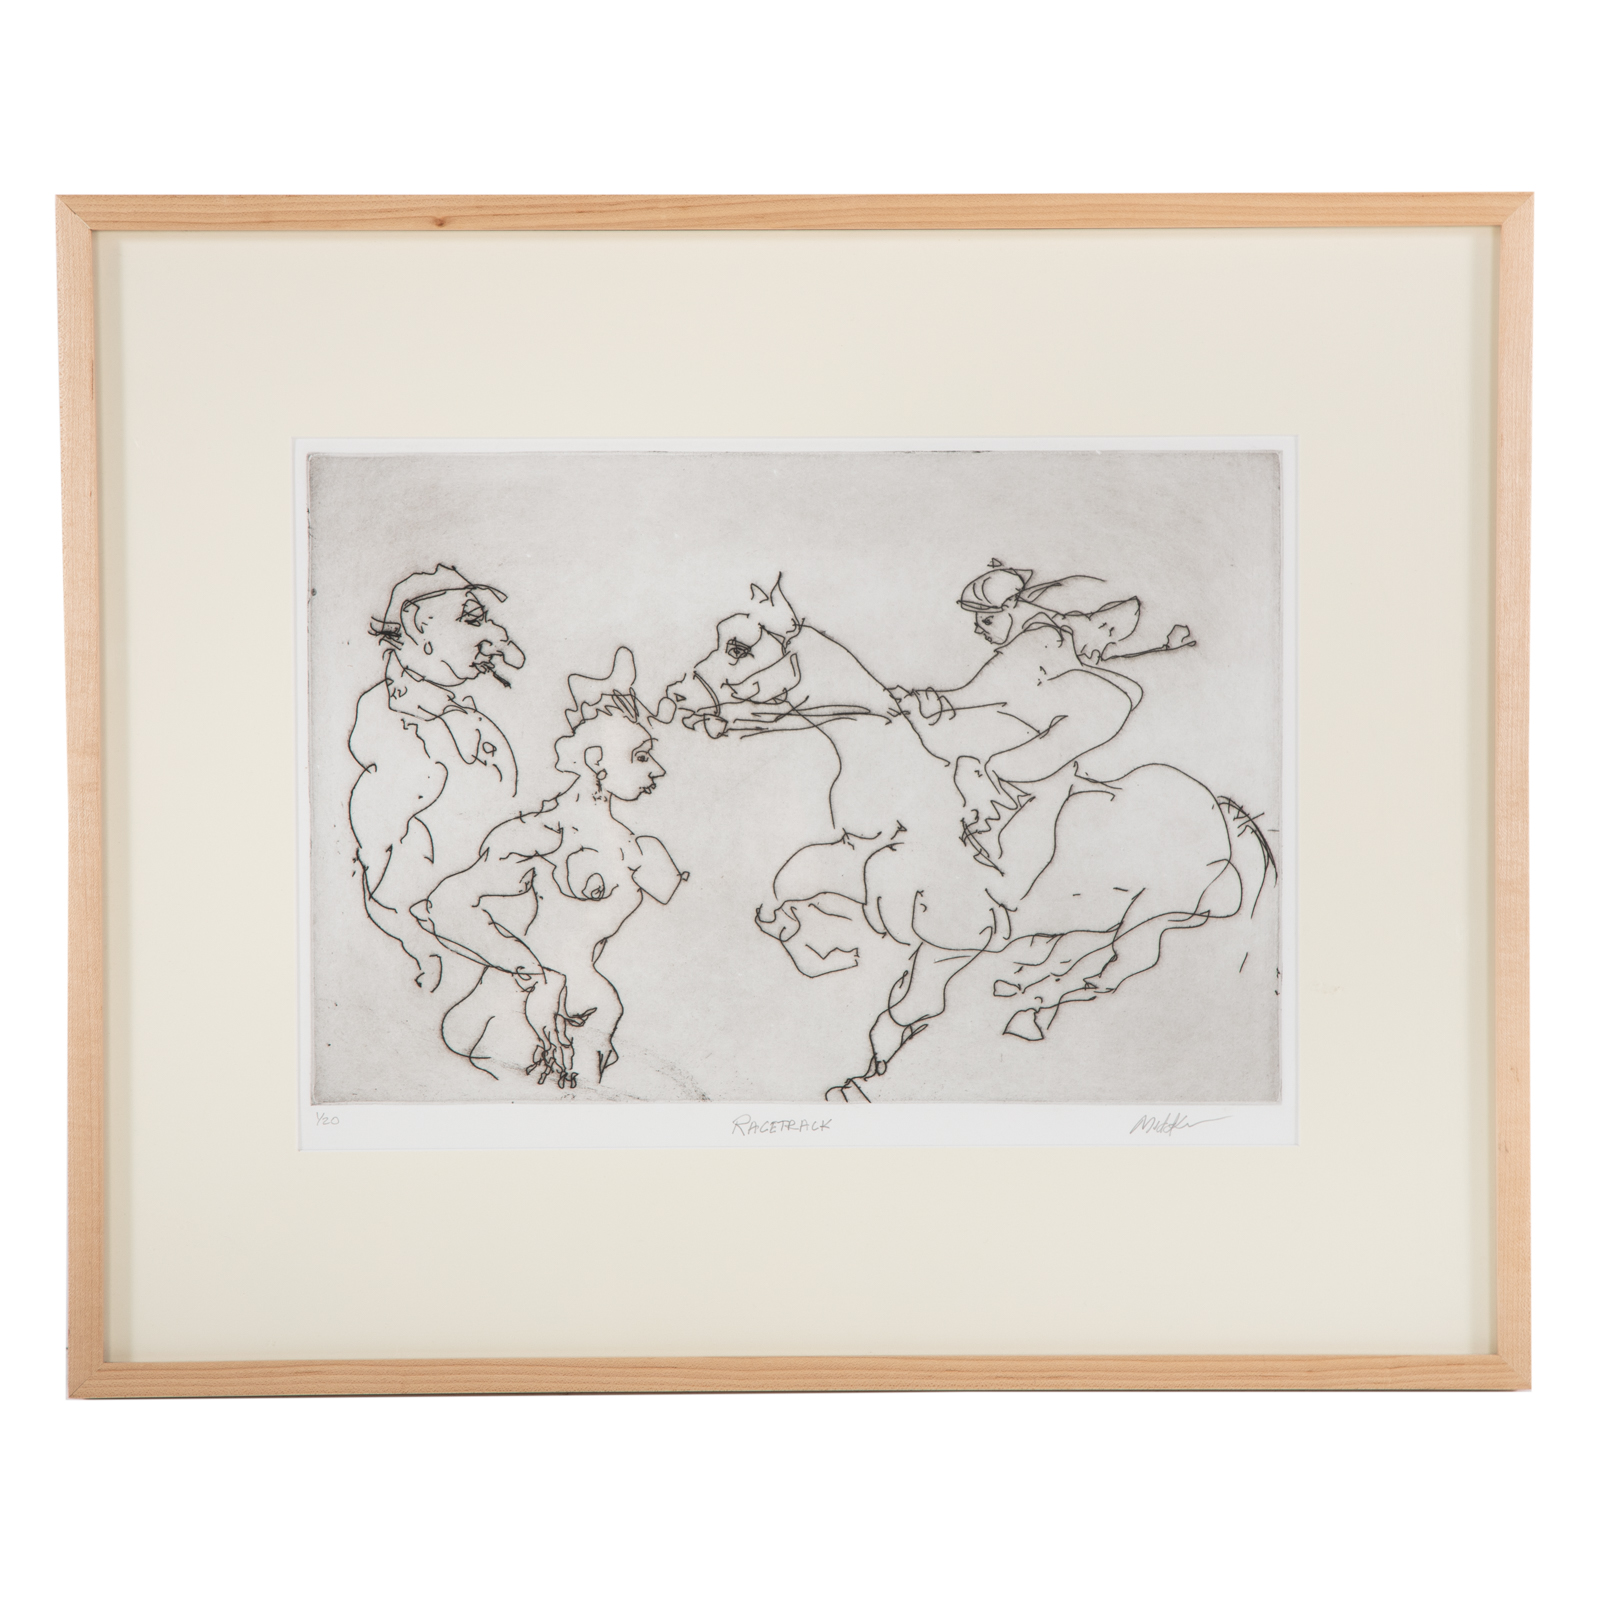 RAOUL MIDDLEMAN RACETRACK ETCHING 287756